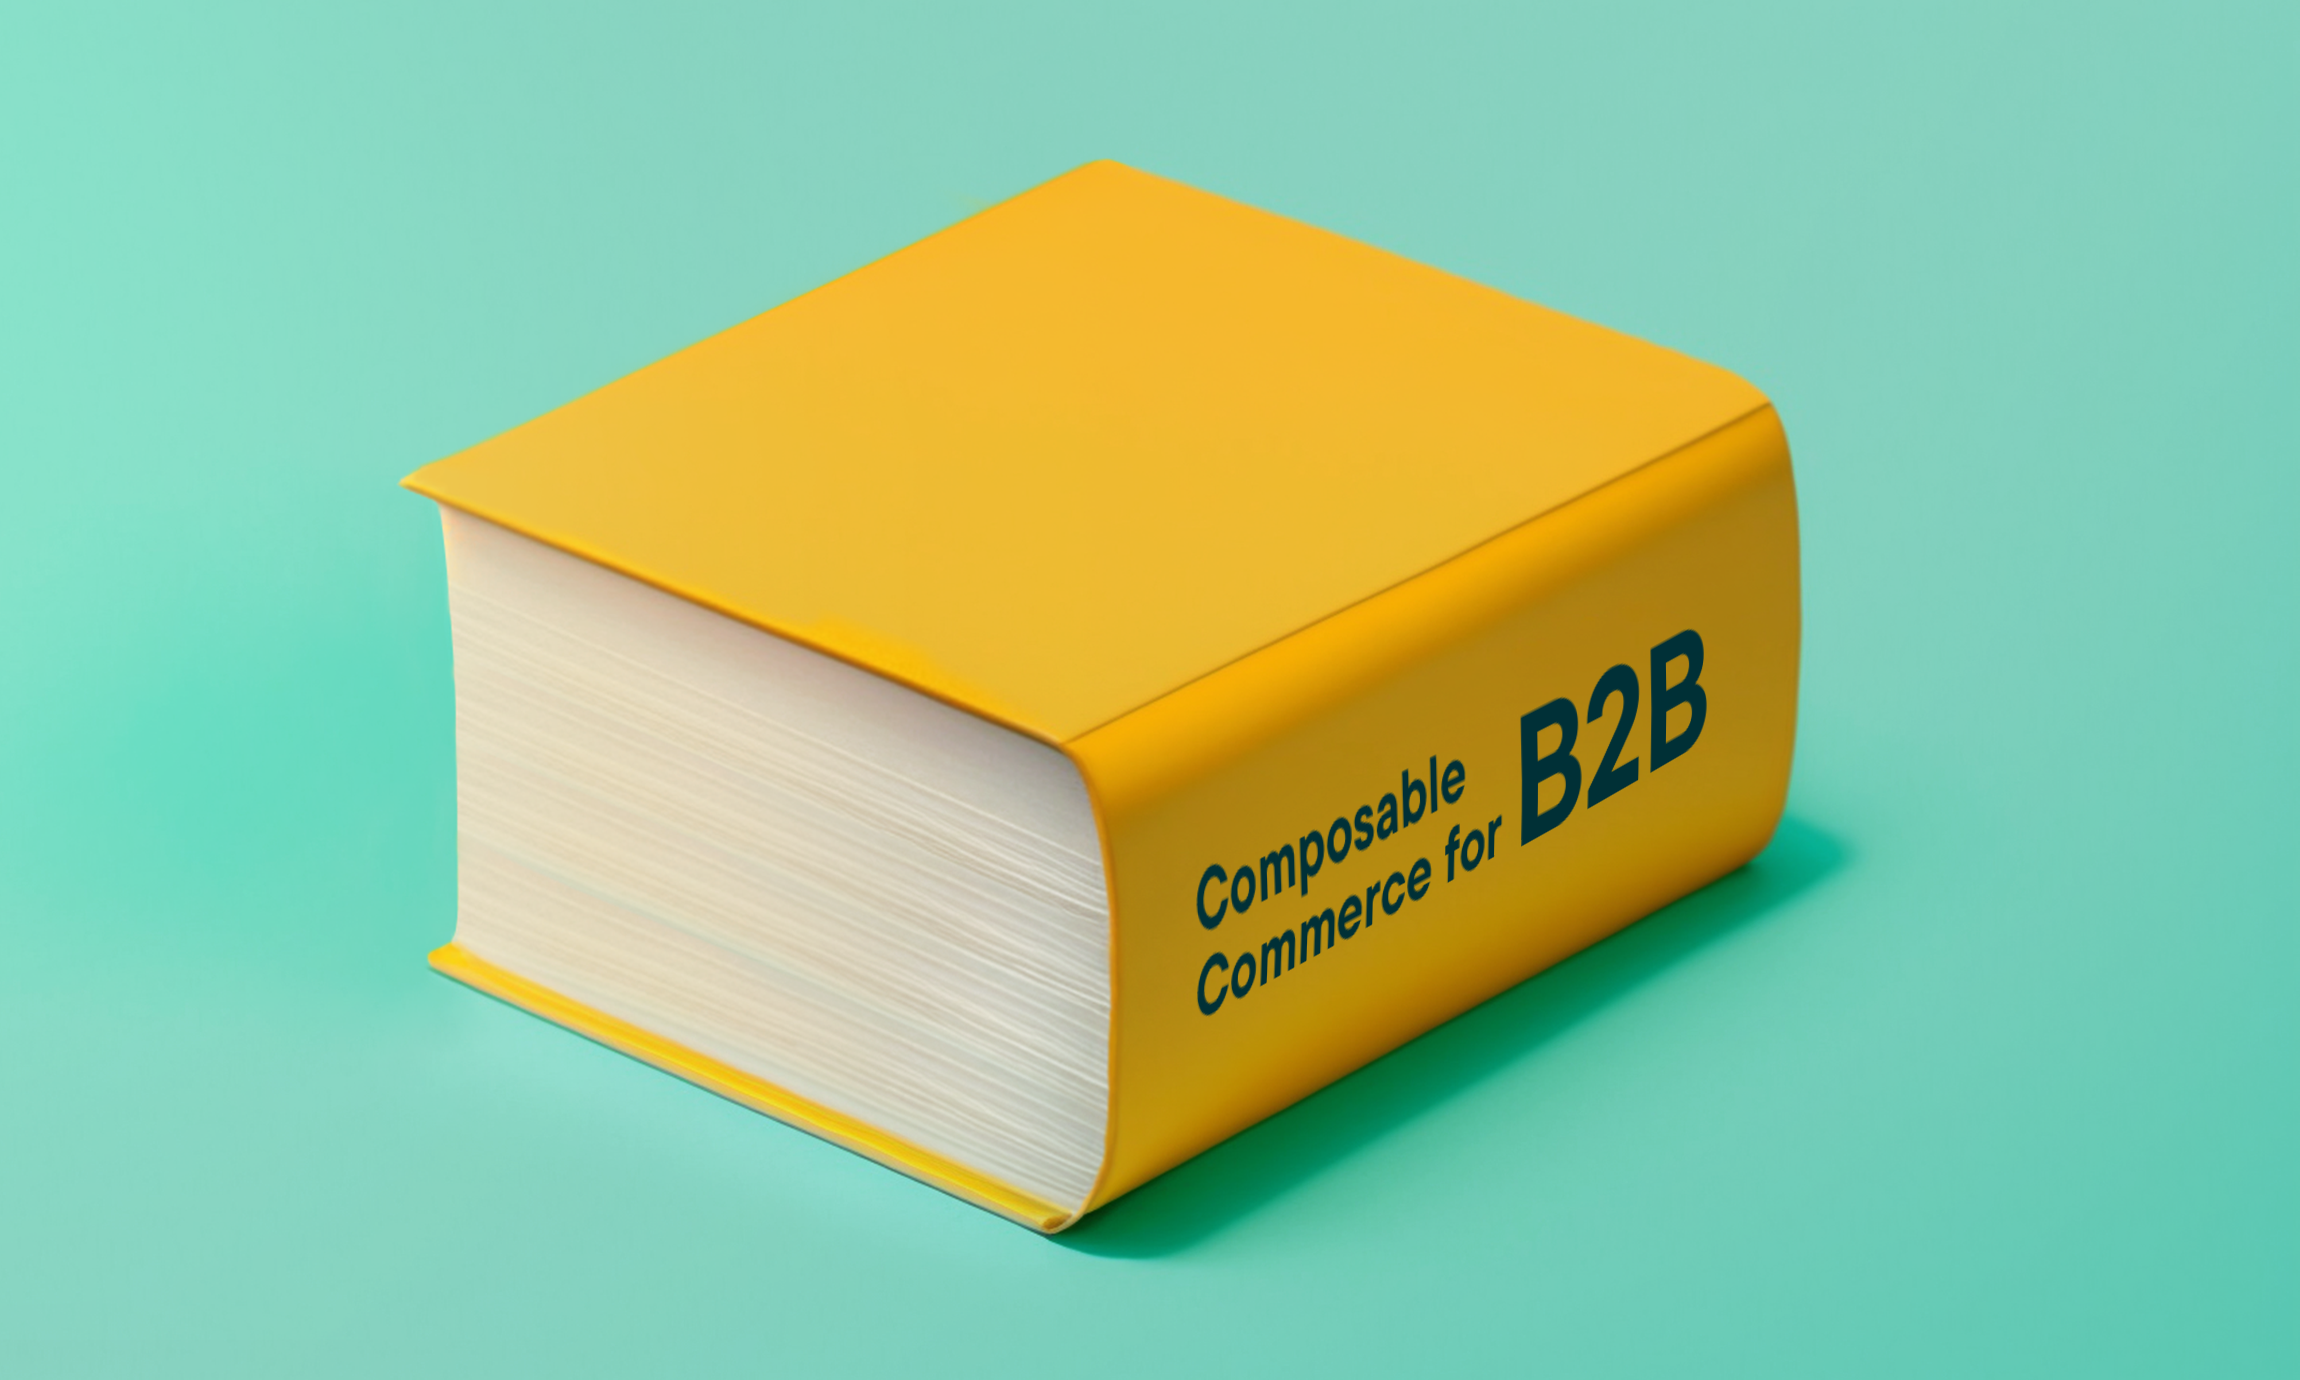 Composable commerce for B2B 101